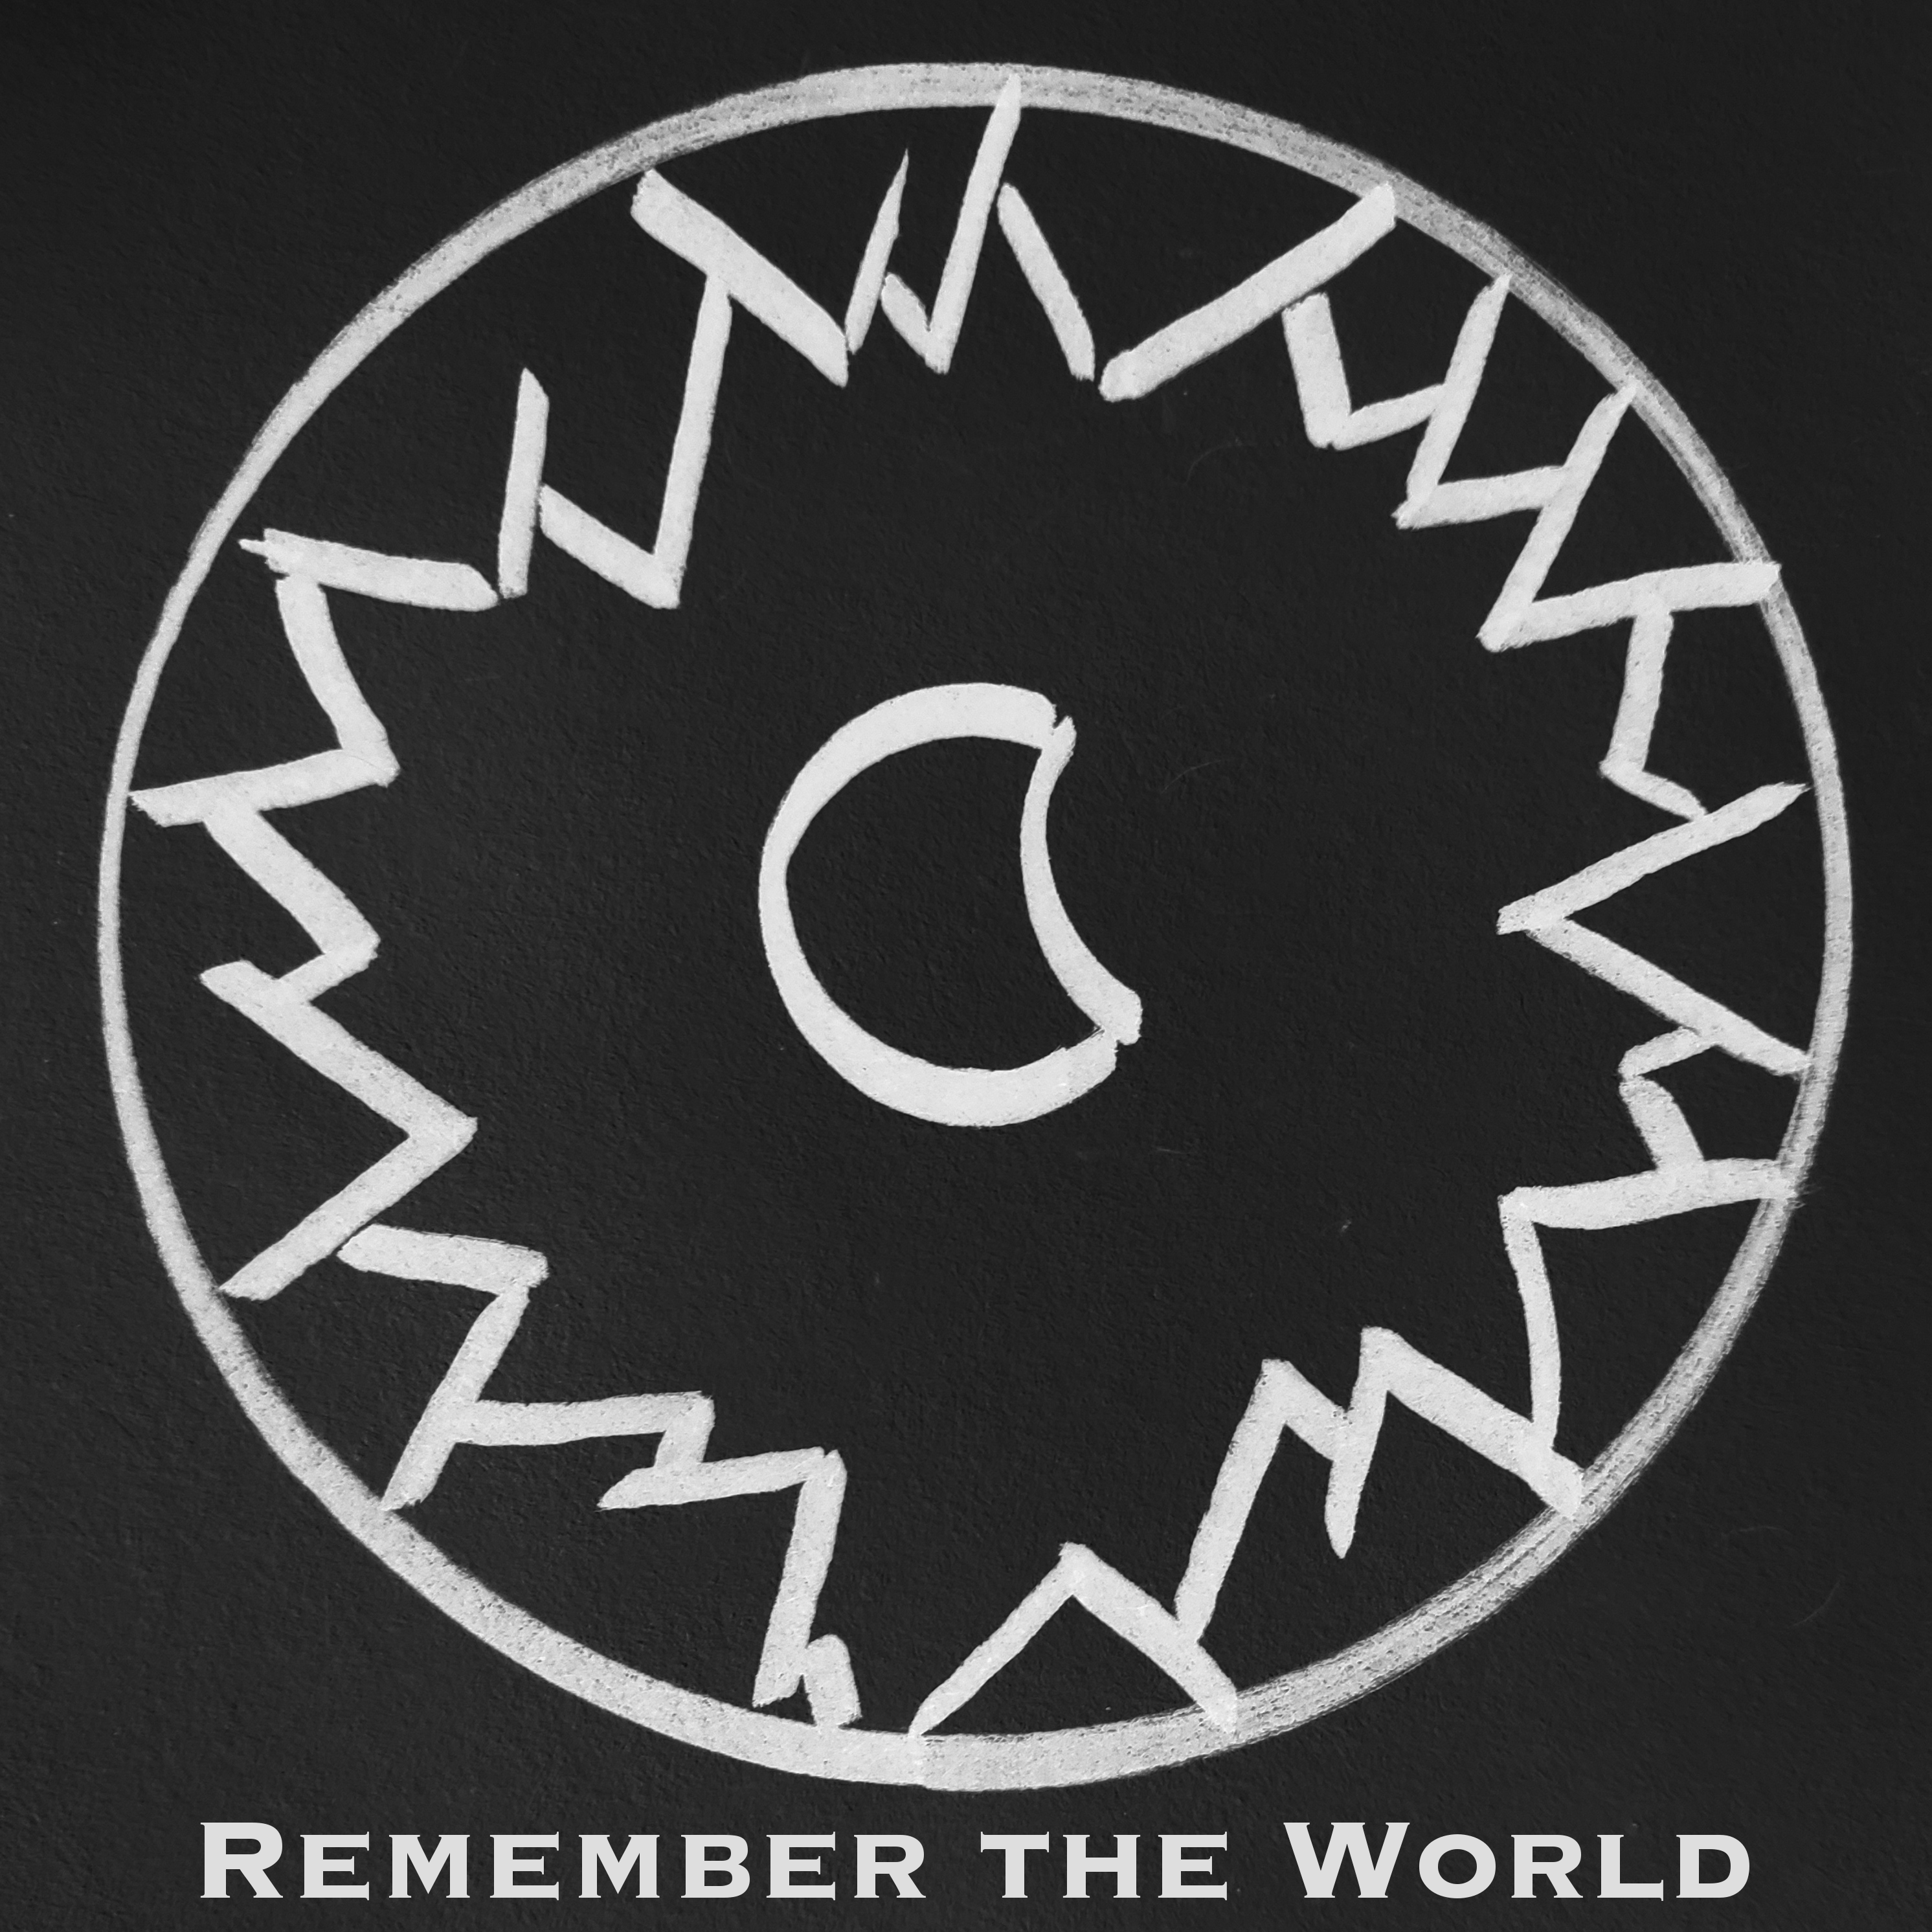 Album cover for 'Remember the World', consisting of a stylized moon in the center of a circle lined with irregular inward-facing triangles, drawn in white on black